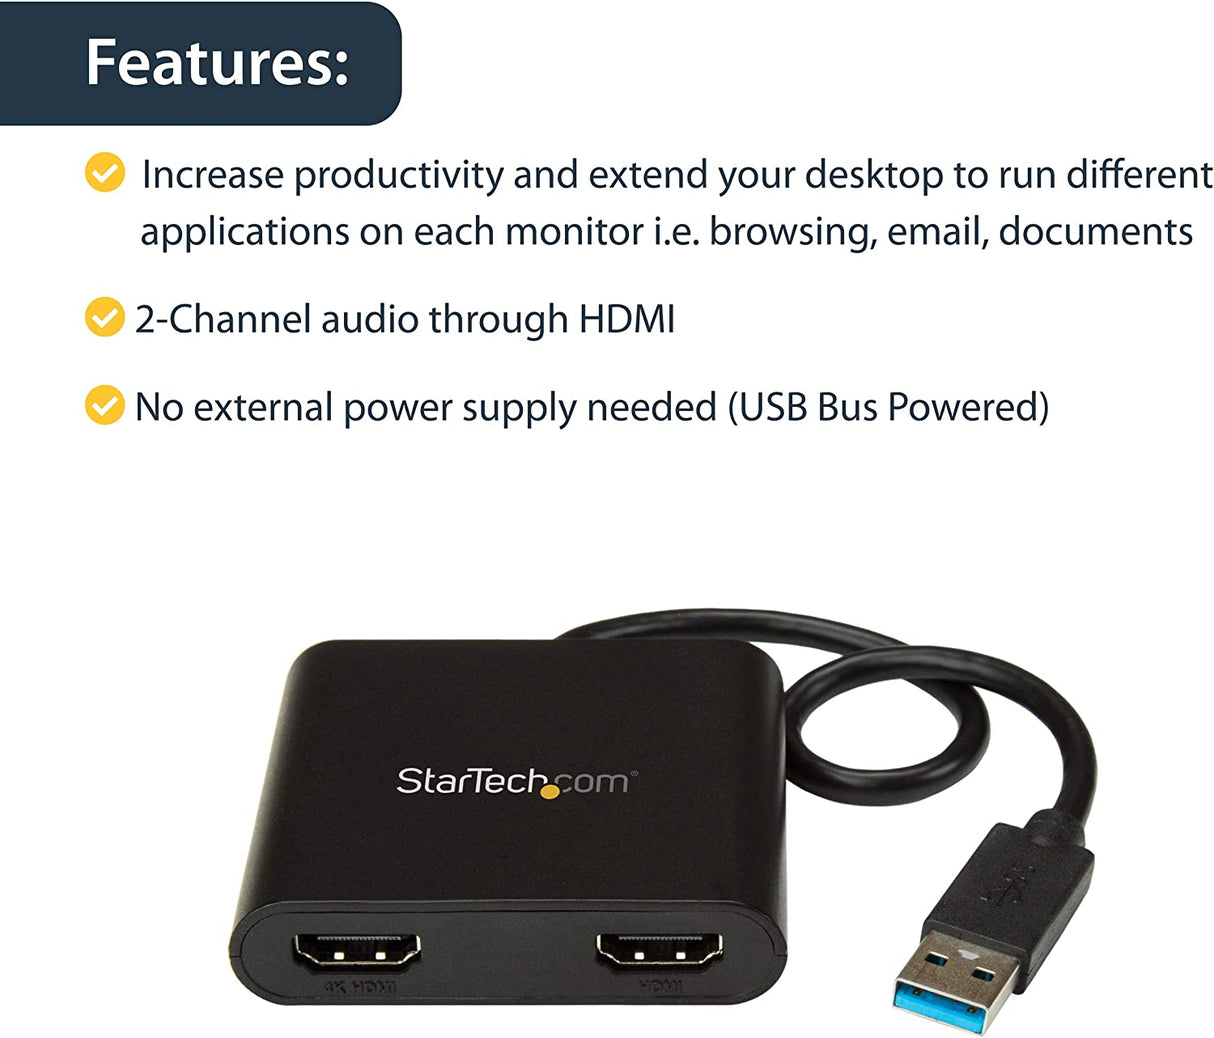 USB32HD2 StarTech.com USB 3.0 to Dual HDMI Adapter - 1x 4K 30Hz & 1x 1080p  - External Video & Graphics Card - USB Type-A to HDMI Dual Monitor Display  Adapter - Supports